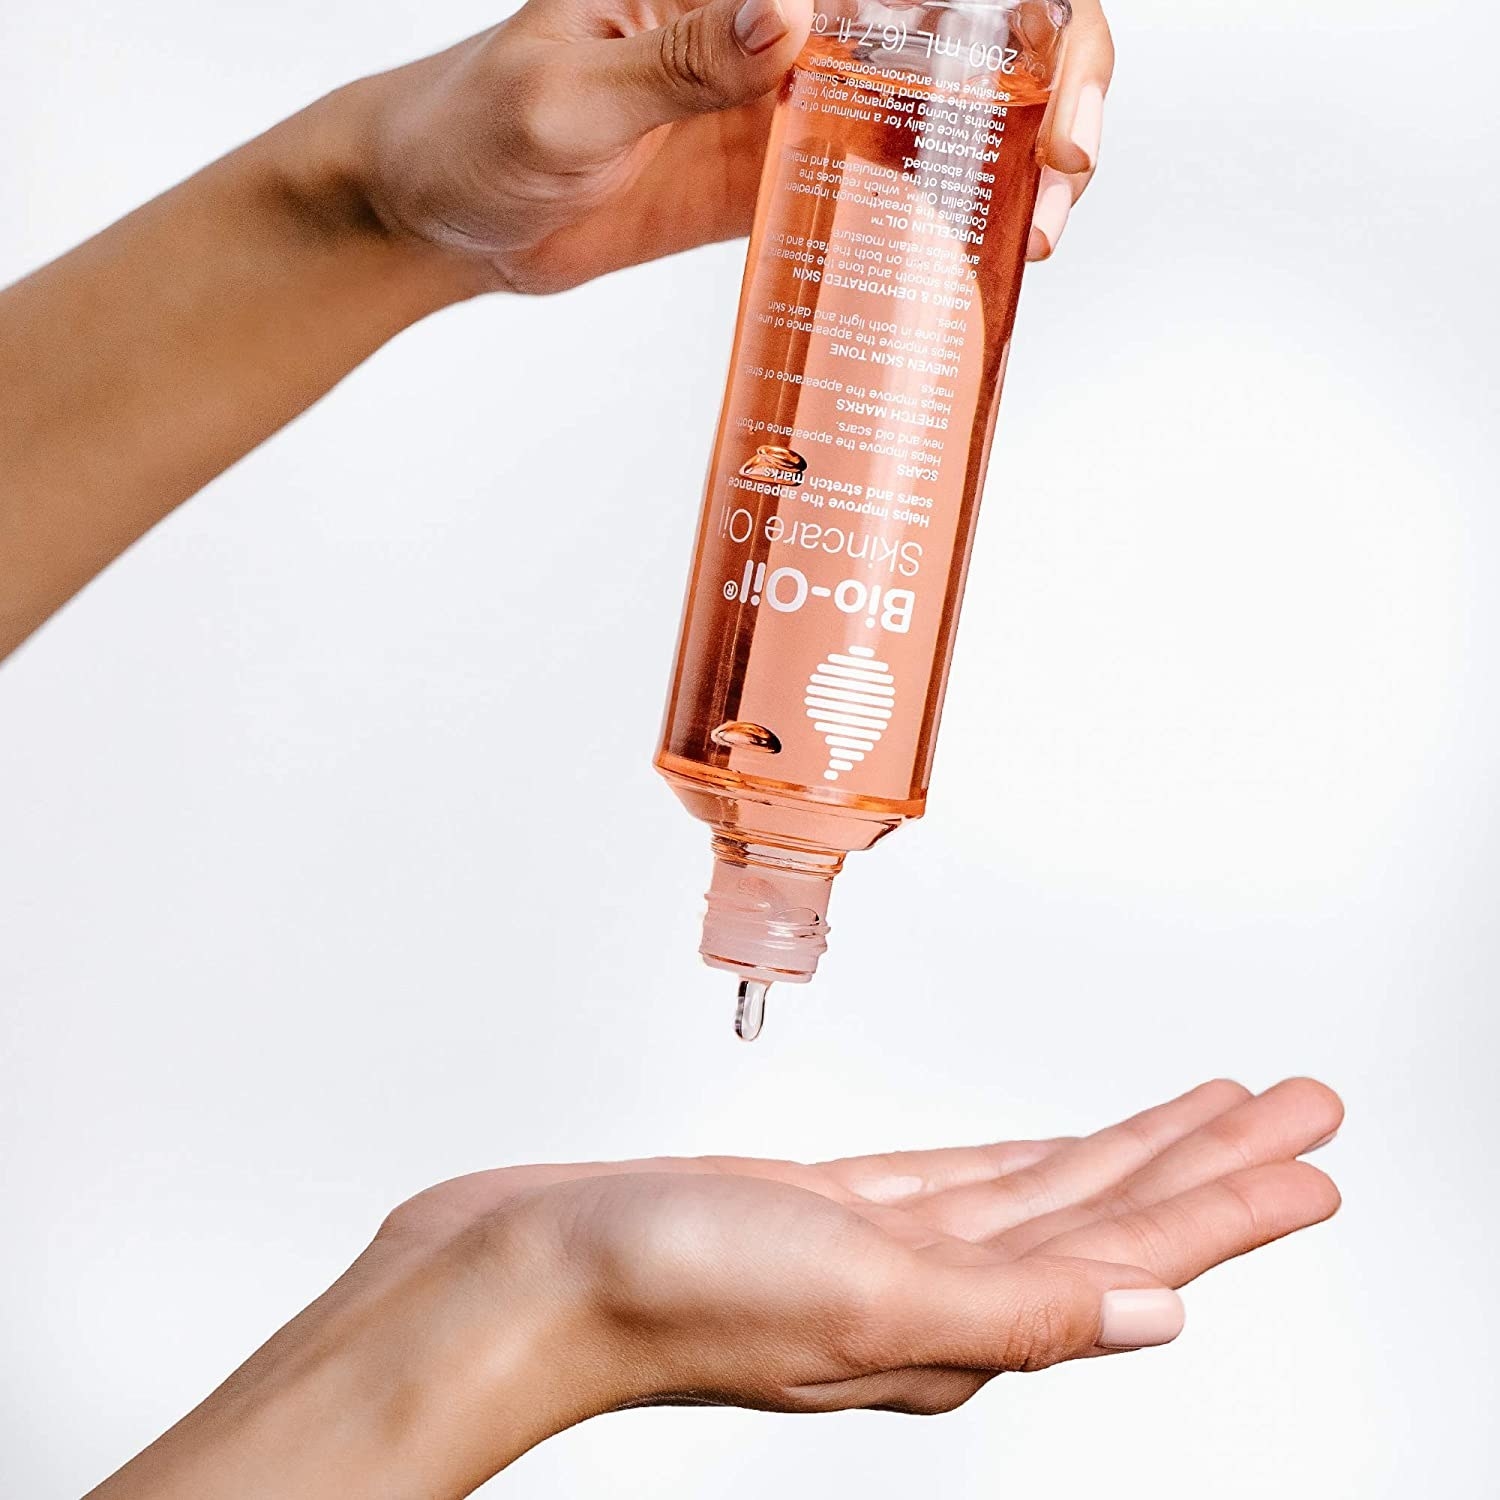 A model pouring bio-oil on their hands 